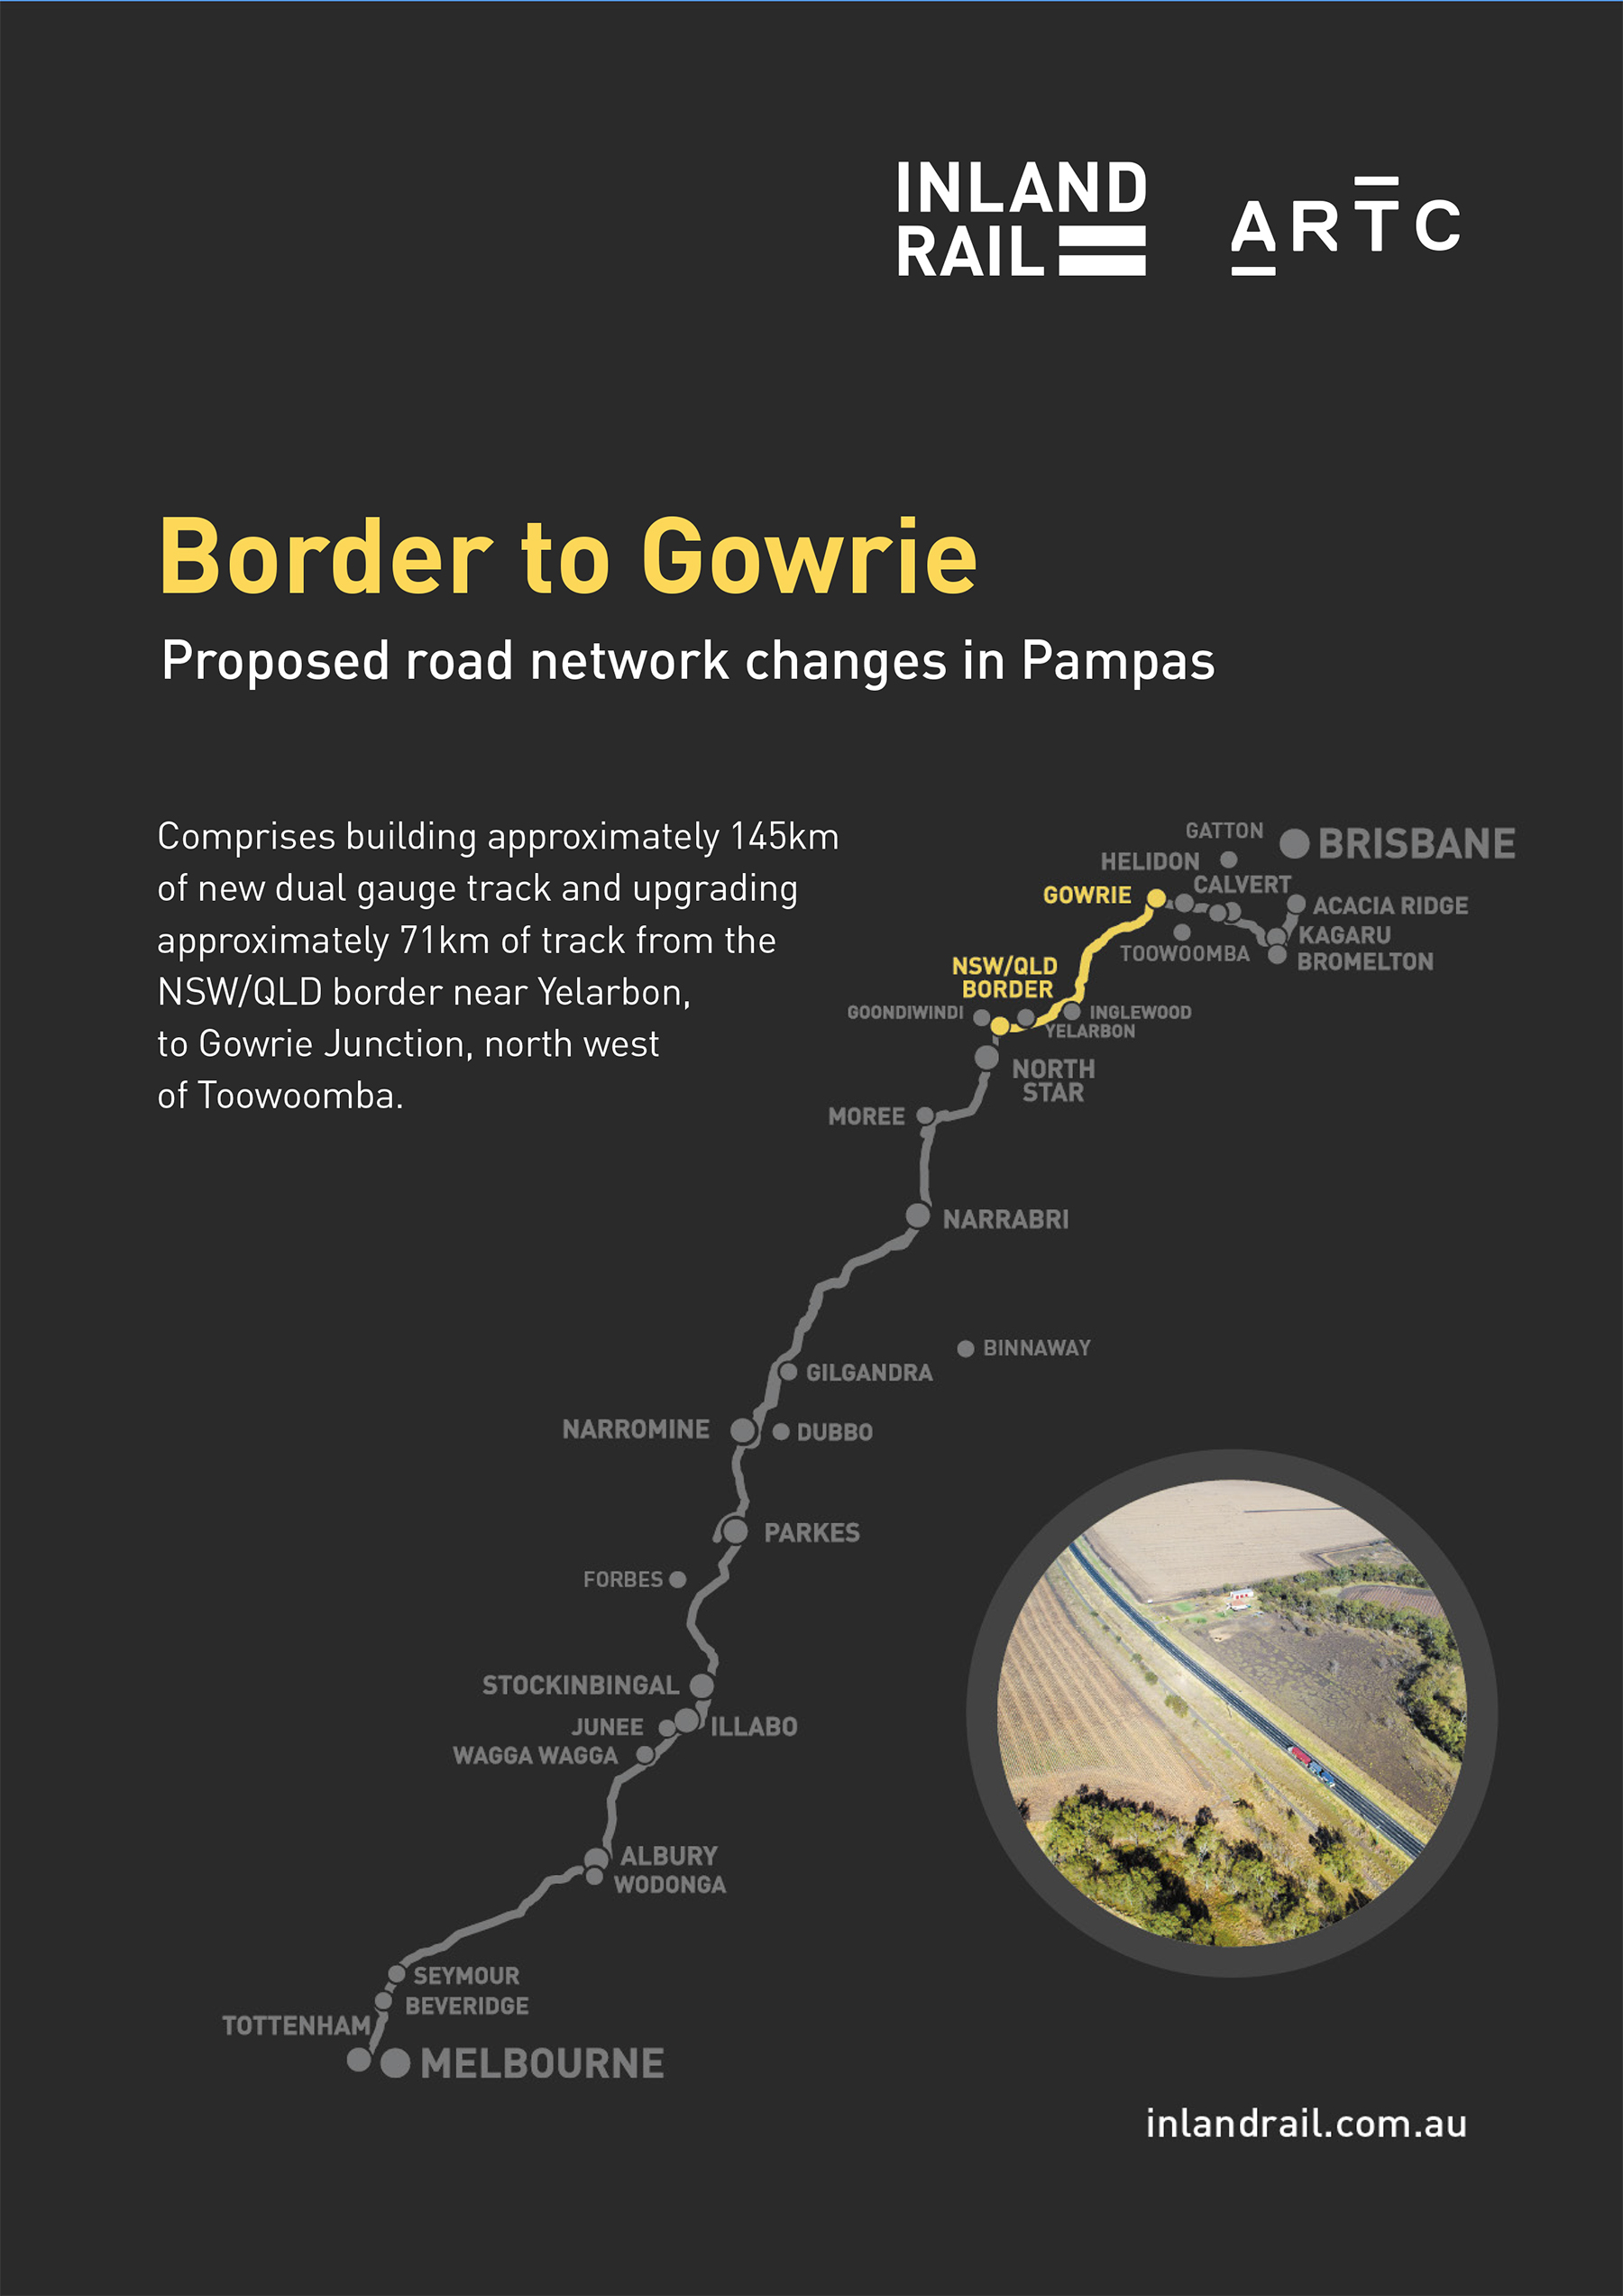 Border to Gowrie - proposed road network changes in Pampas